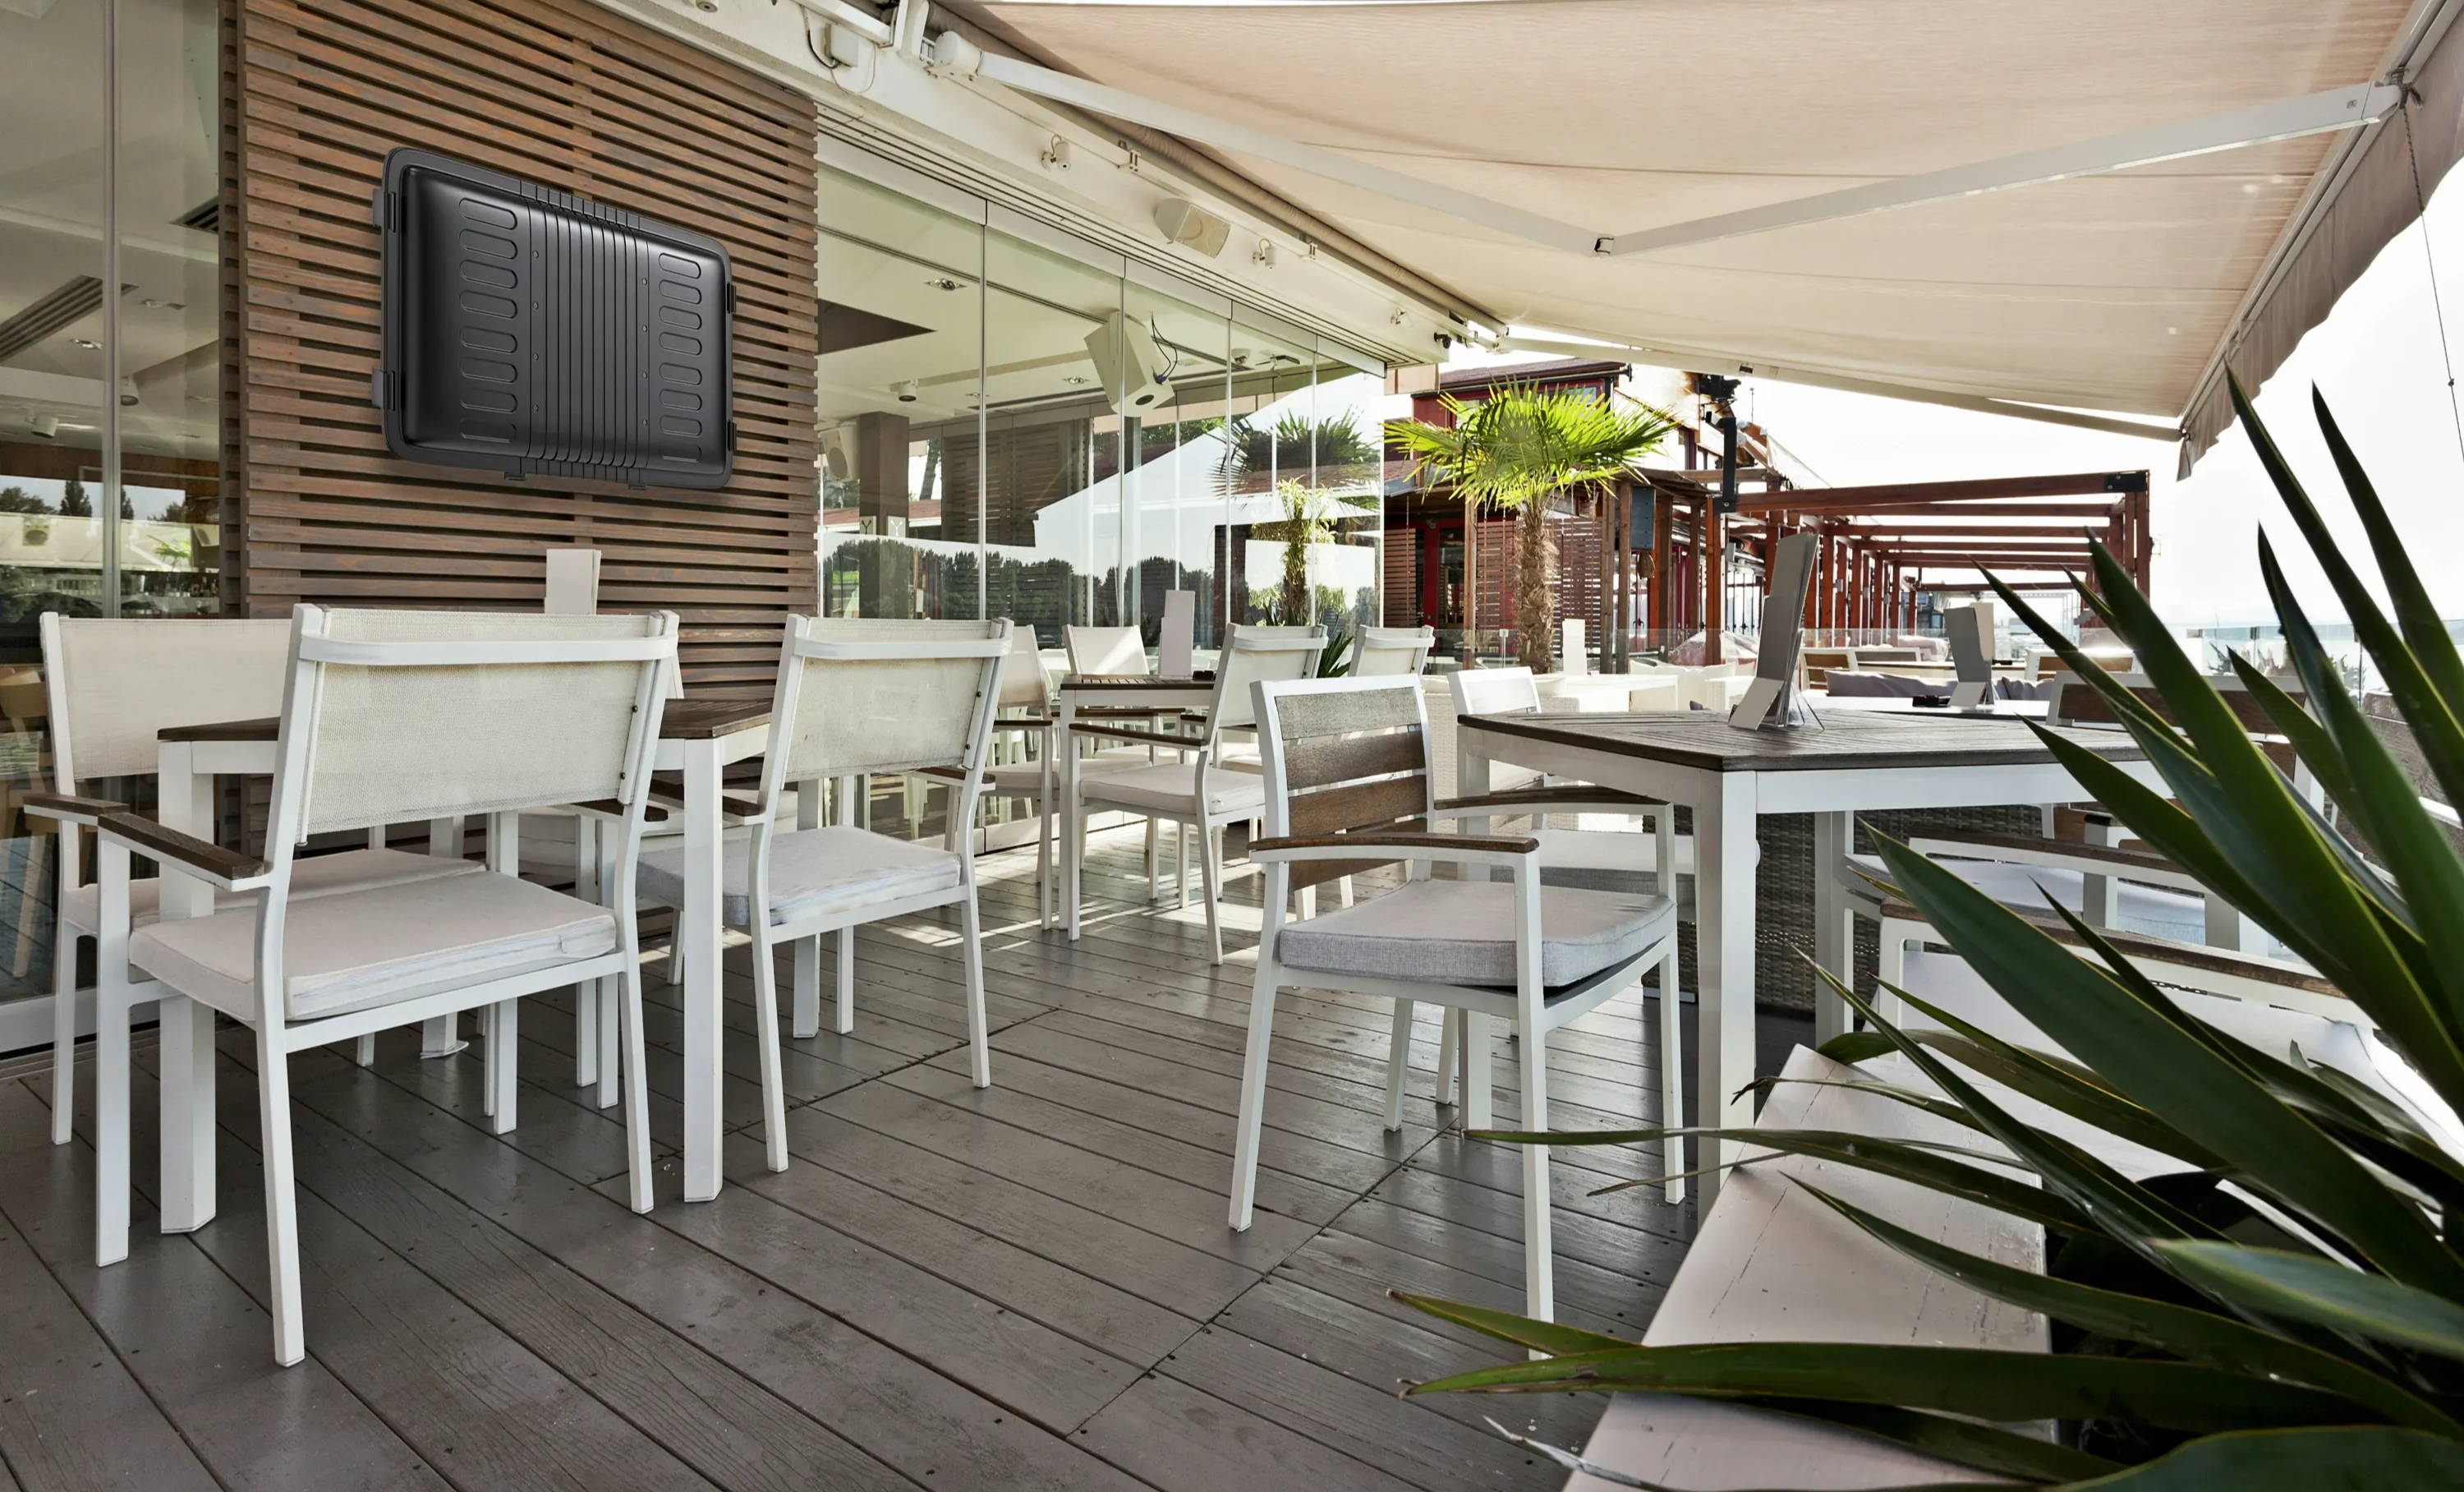 The E-series Outdoor enclosure is an affordable cover for restaurants 